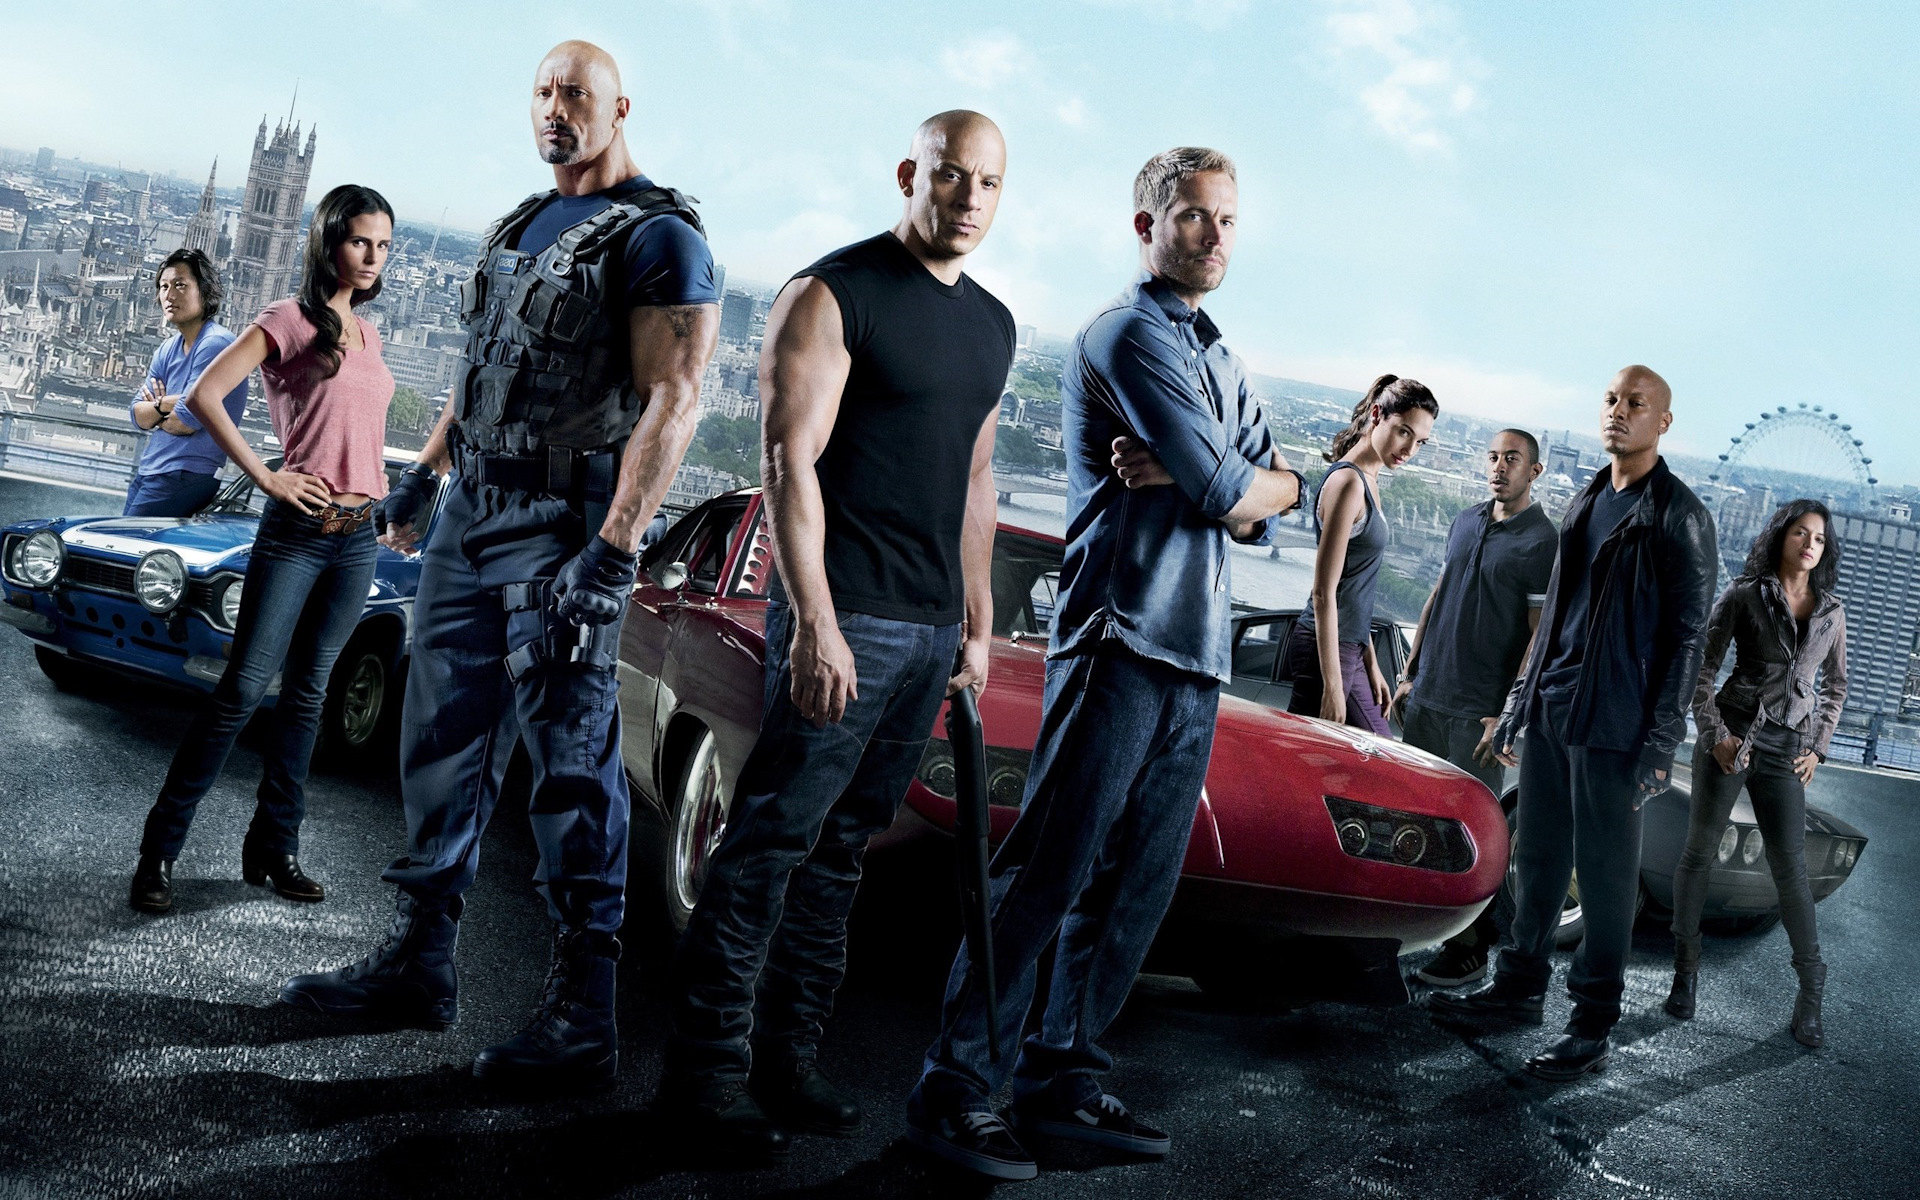 Форсаж 5 6. Fast & Furious 6 2013 poster. Fast and Furious 10 Paul Walker.